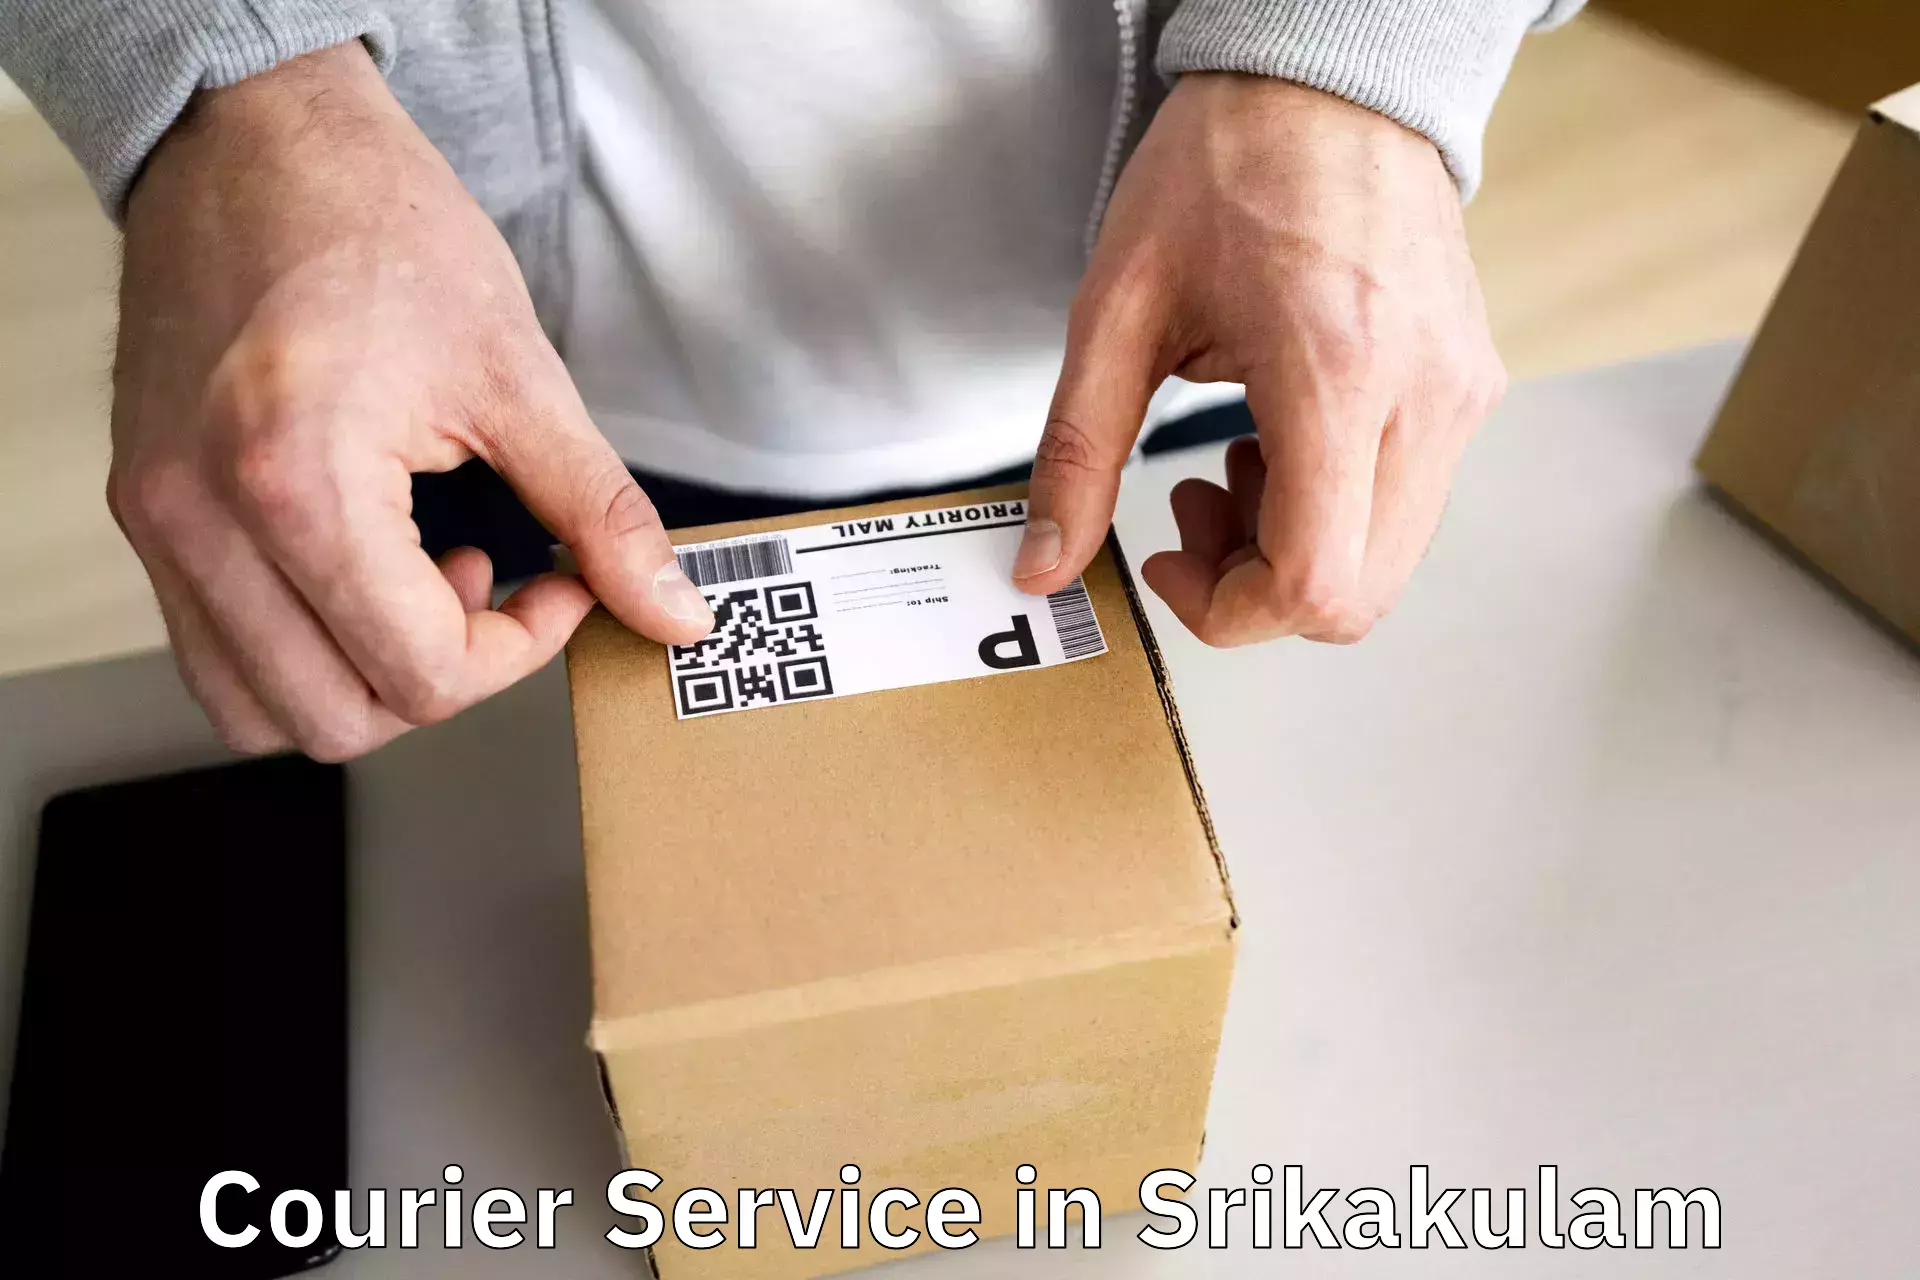 Automated shipping processes in Srikakulam